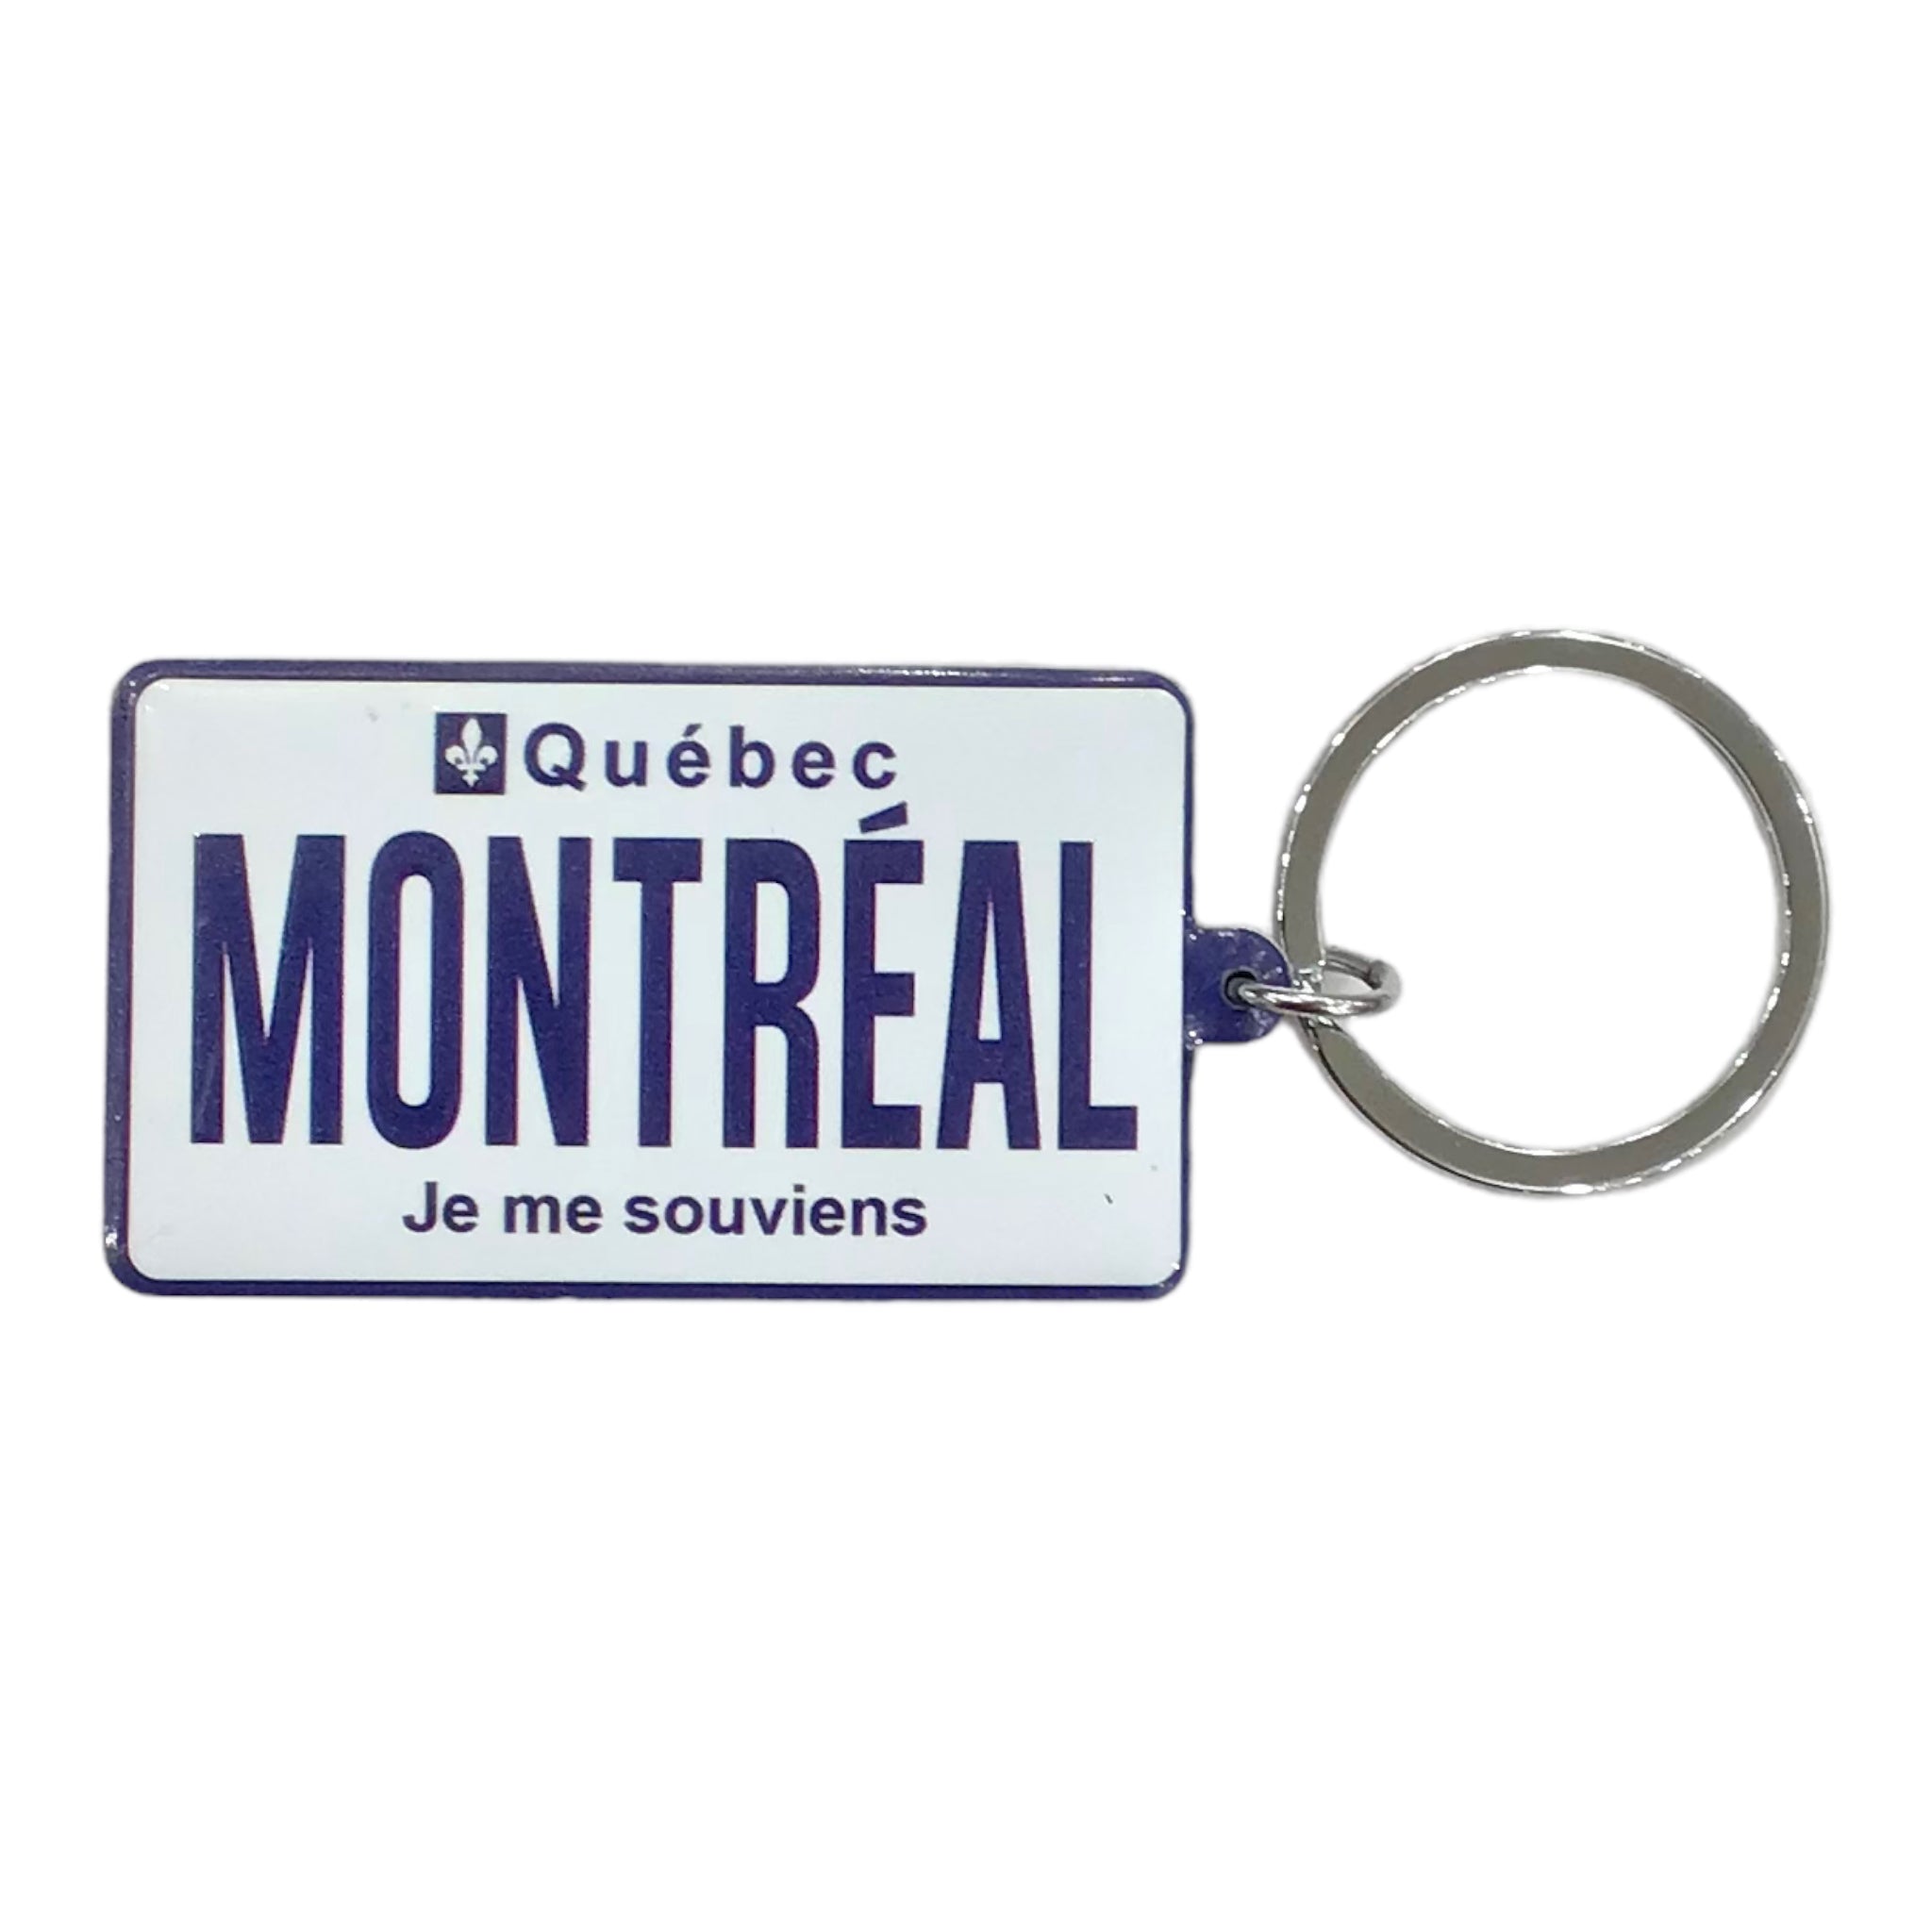 Keychain Double Sided - Montreal Car Plate Theme and Canadian Flag Key Ring